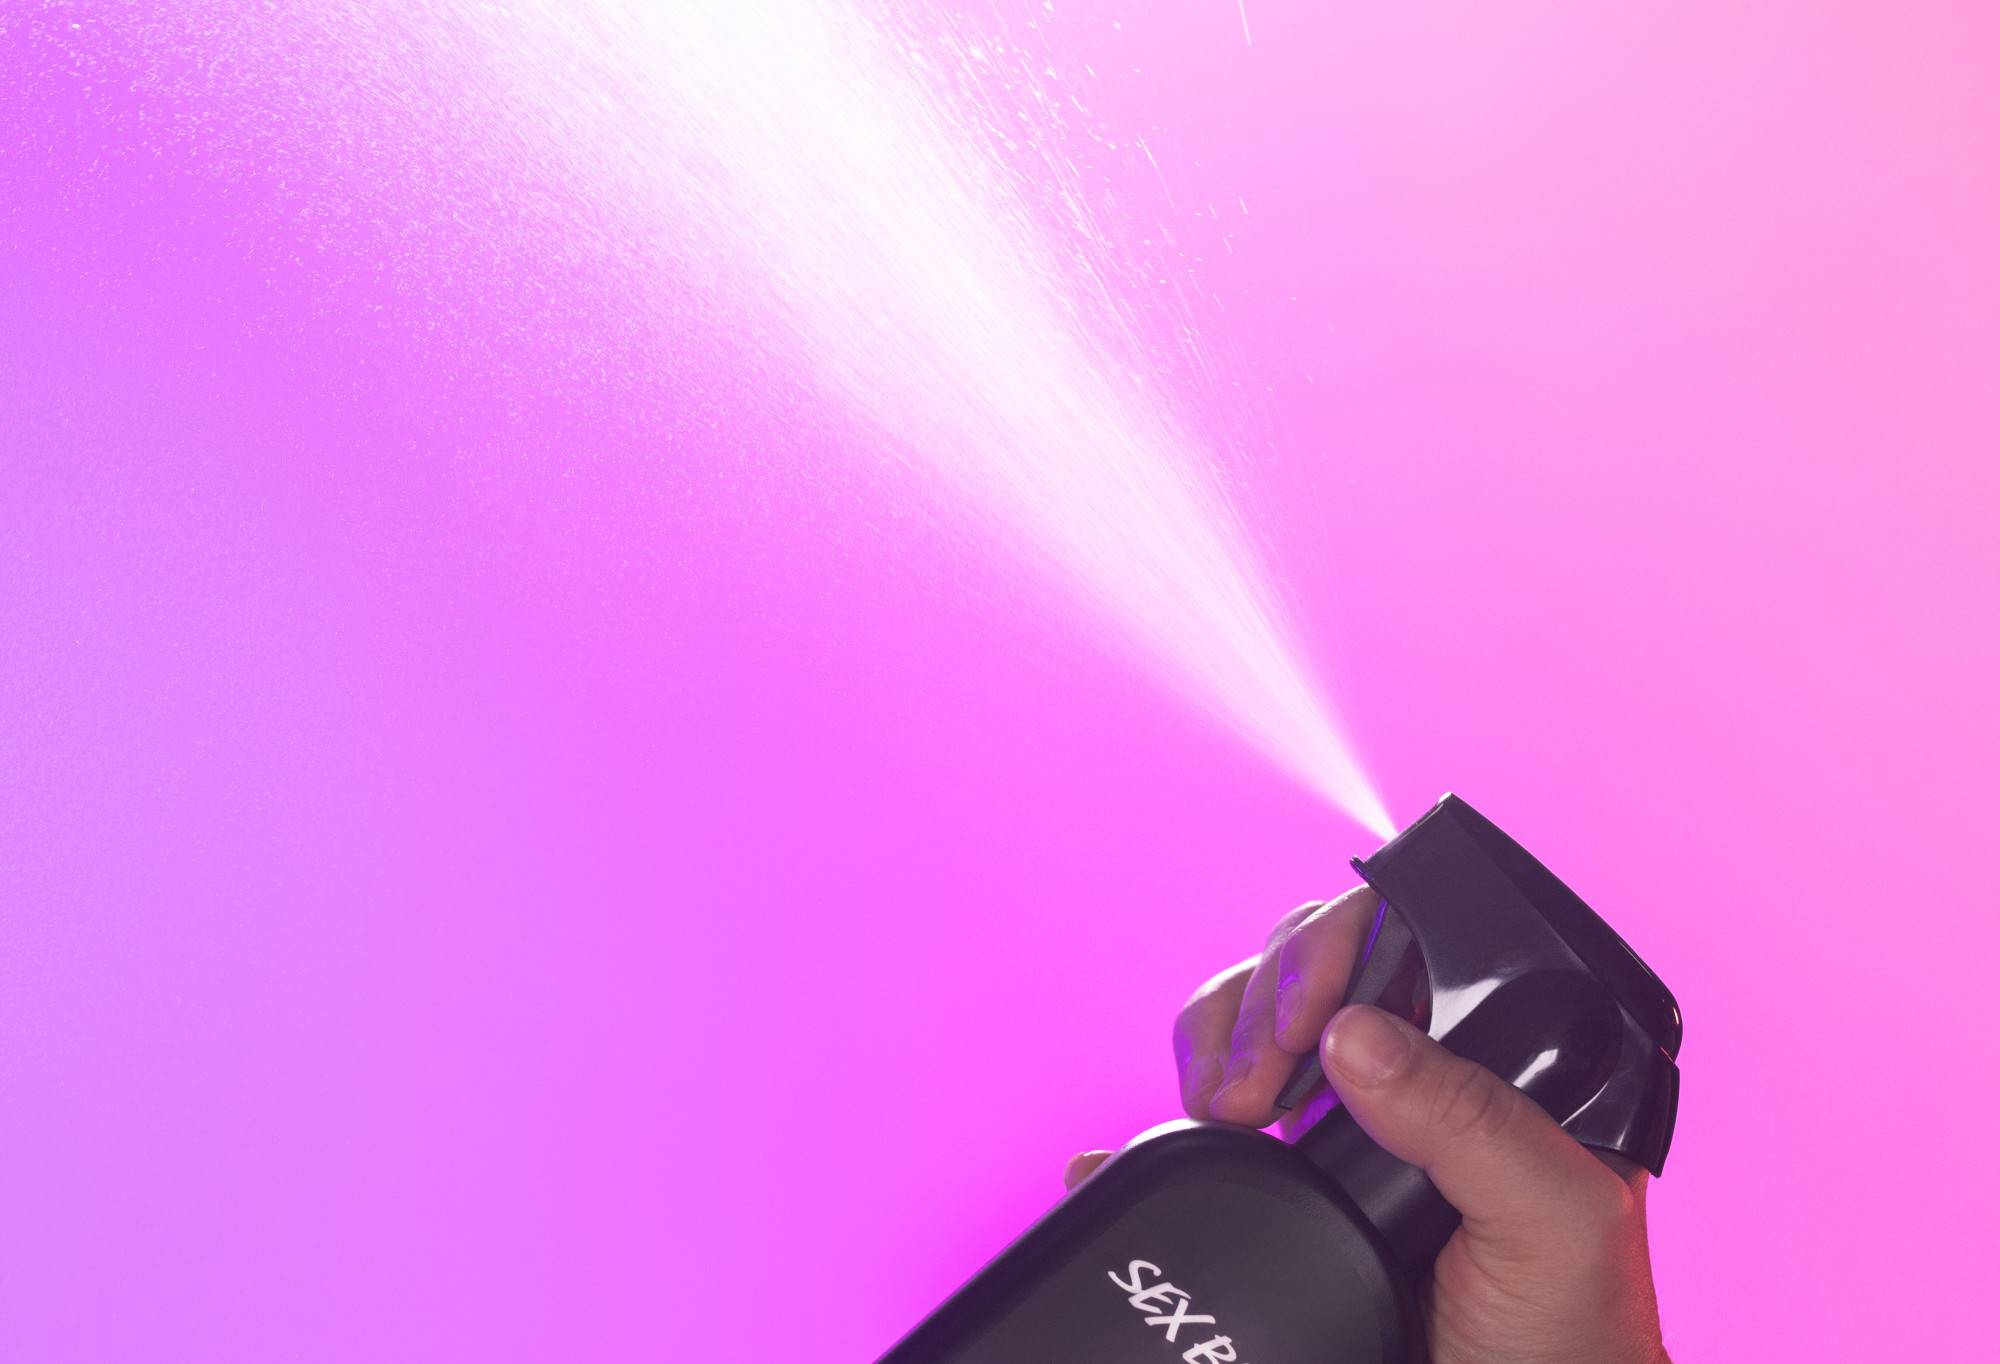 Sex Bomb body spray is sprayed up into the air, in front of a vibrant, purple to pink gradient background.